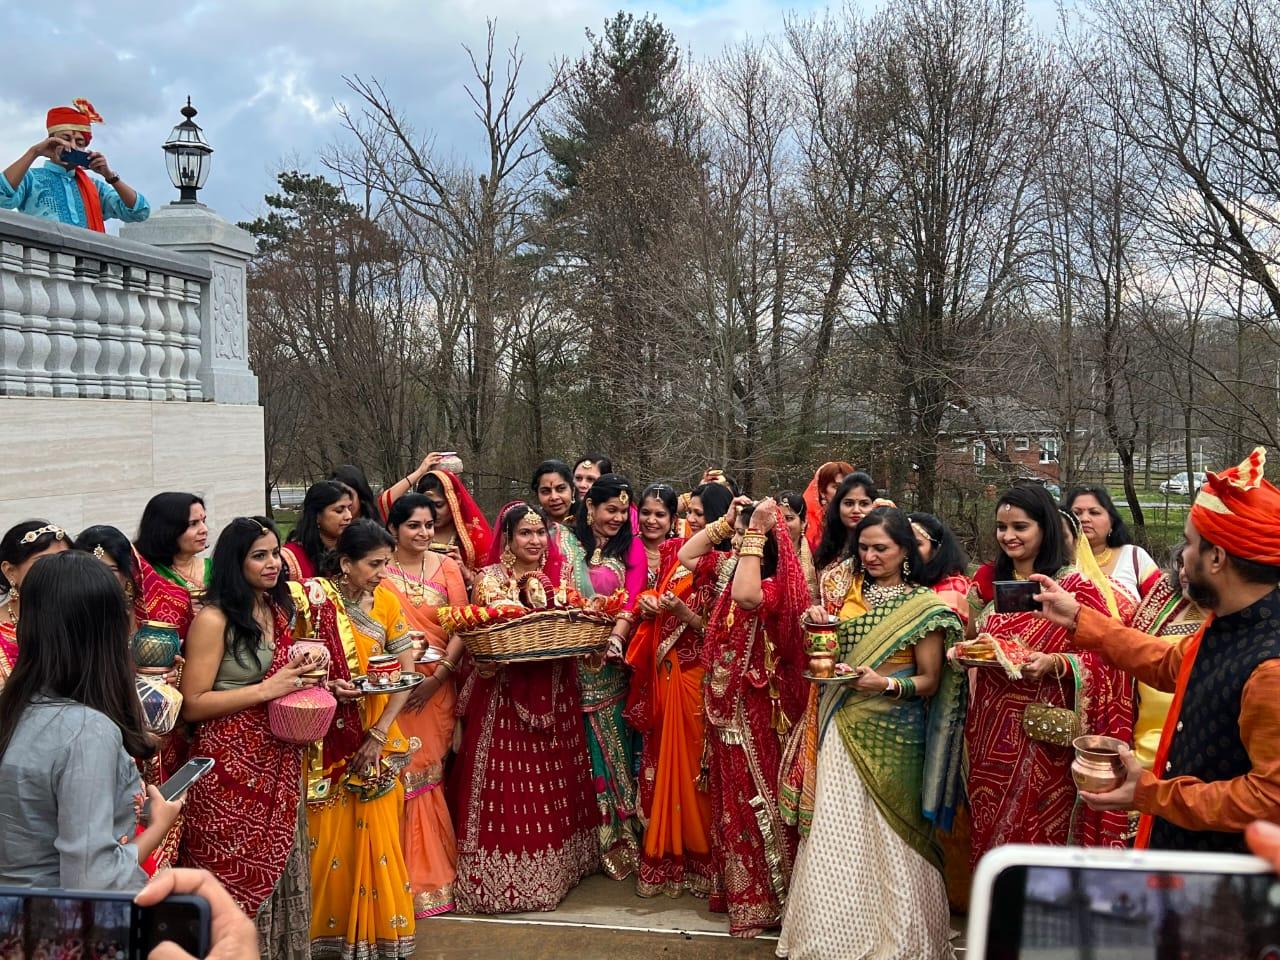 Rajasthani culture and tradition come alive in America, celebrated Gangaur, took out ride